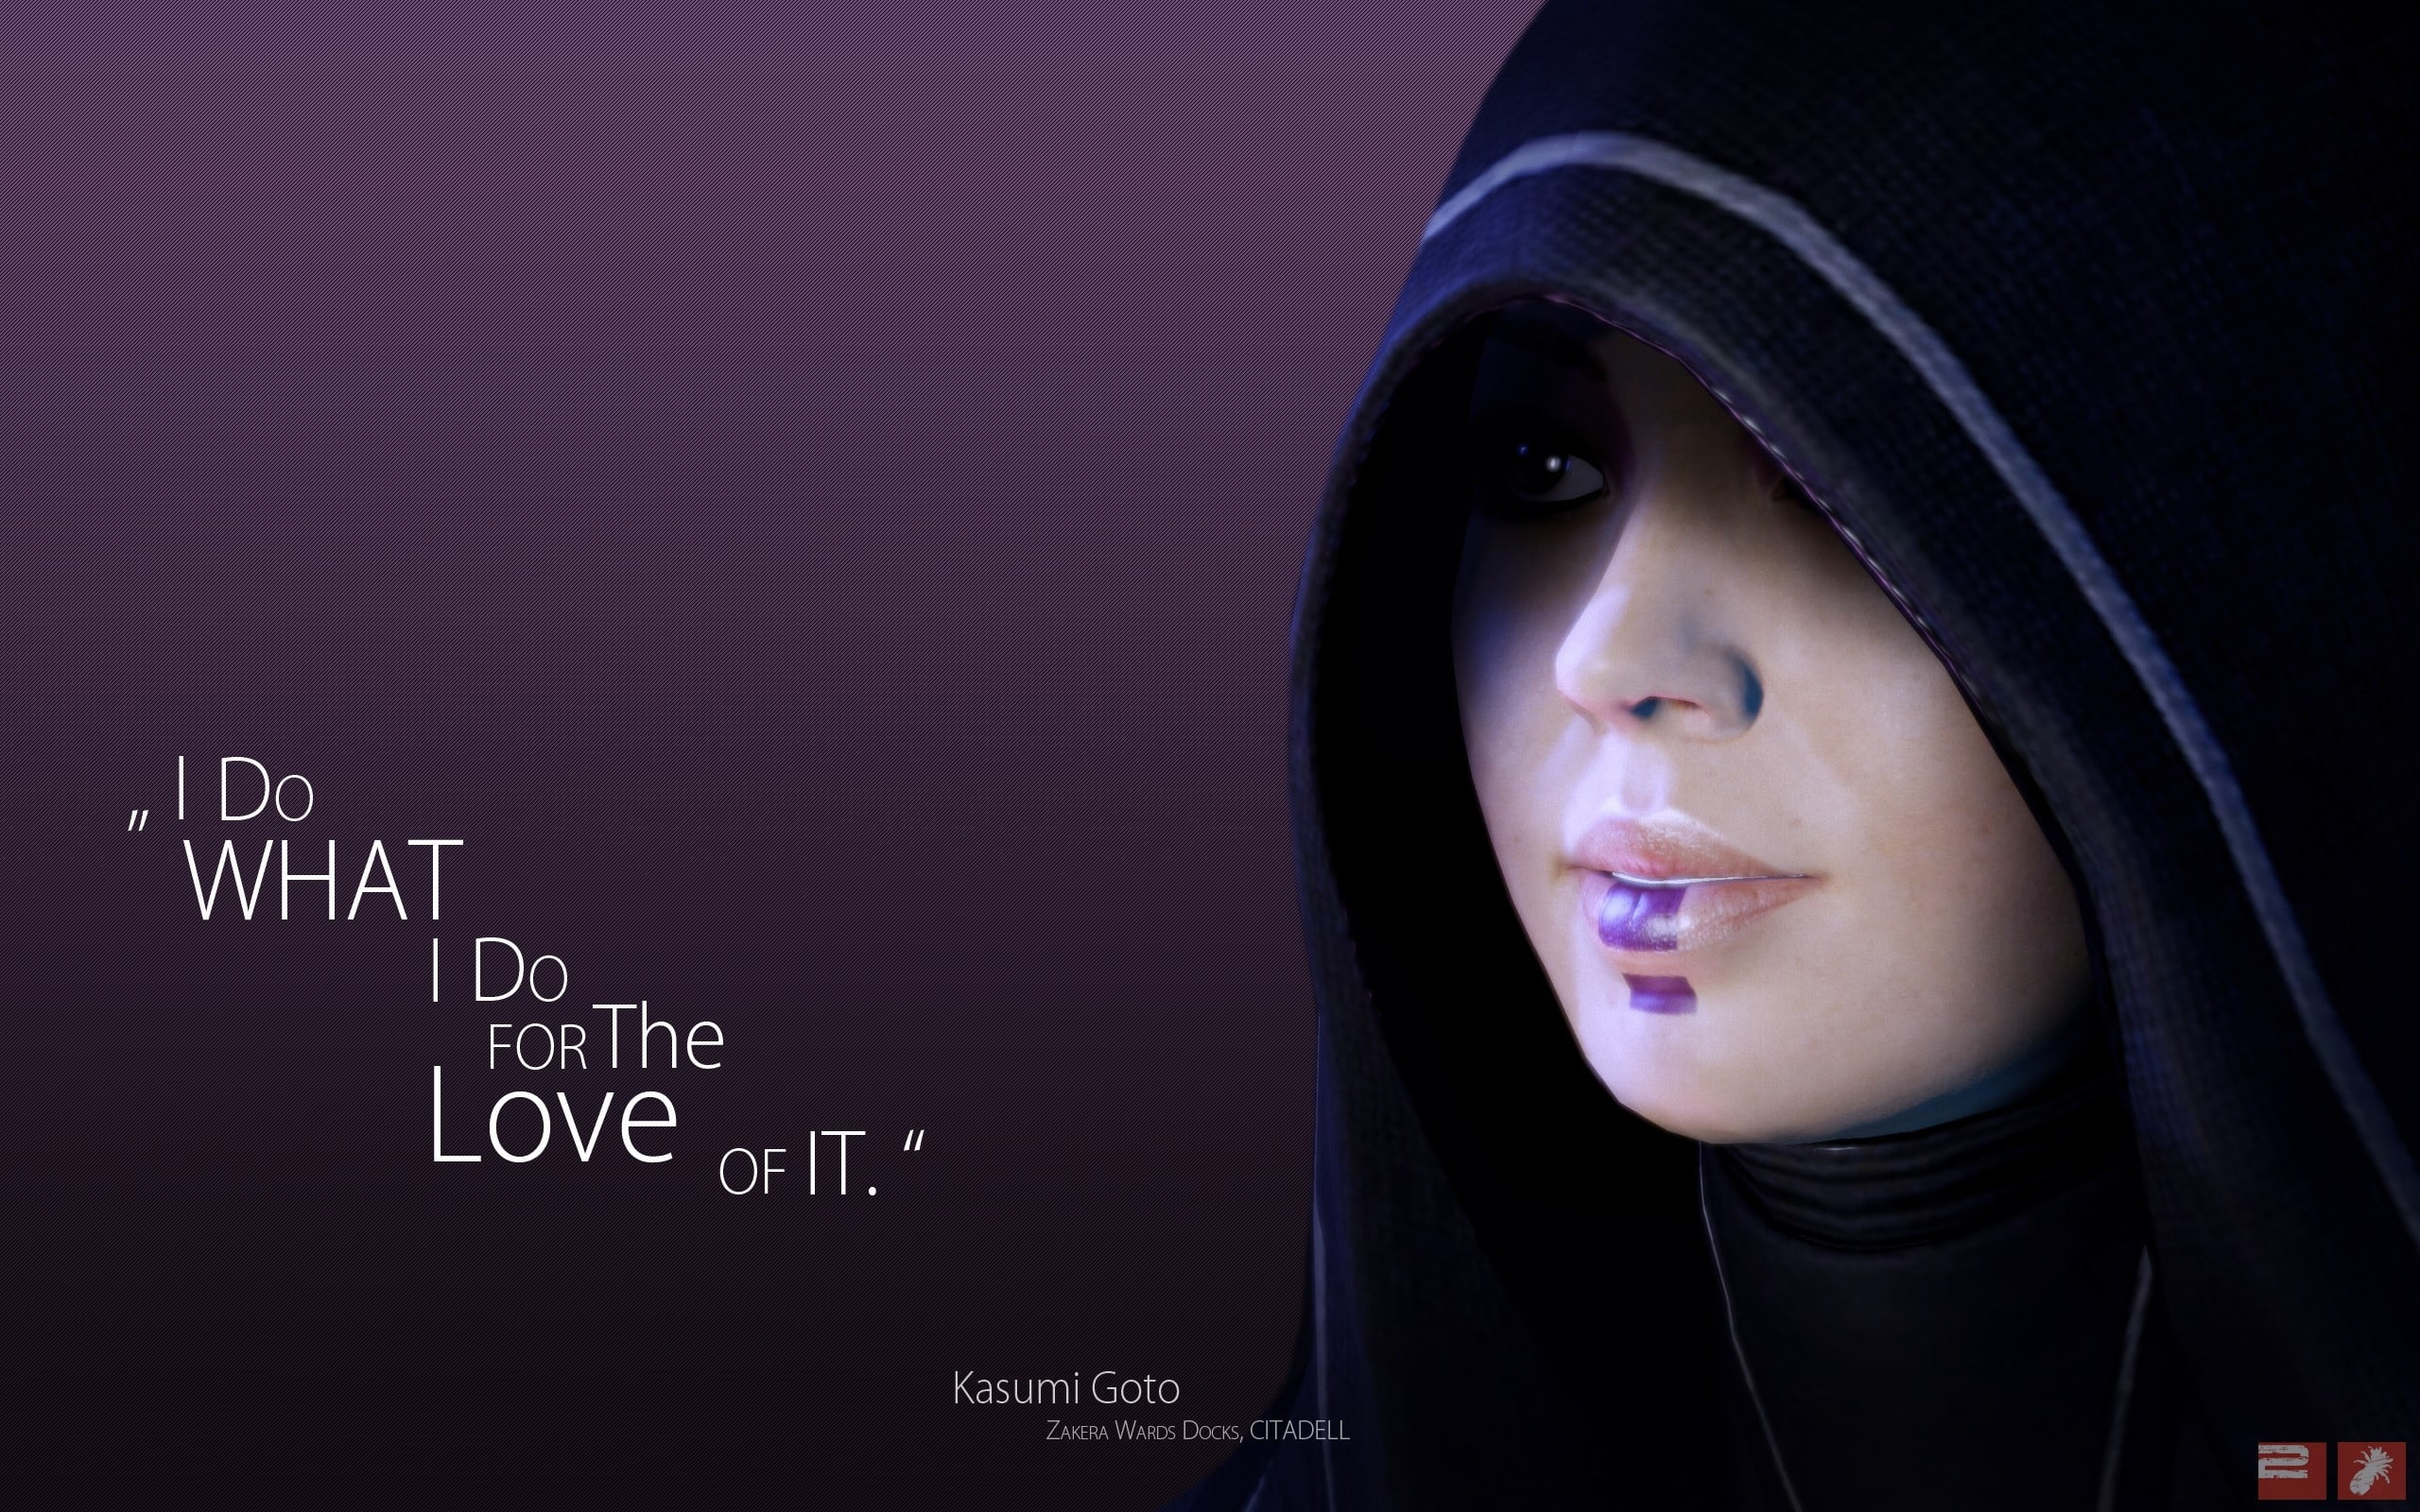 Mass effect, Kasumi goto, Hood, Face, Female, Quote, Look, Character